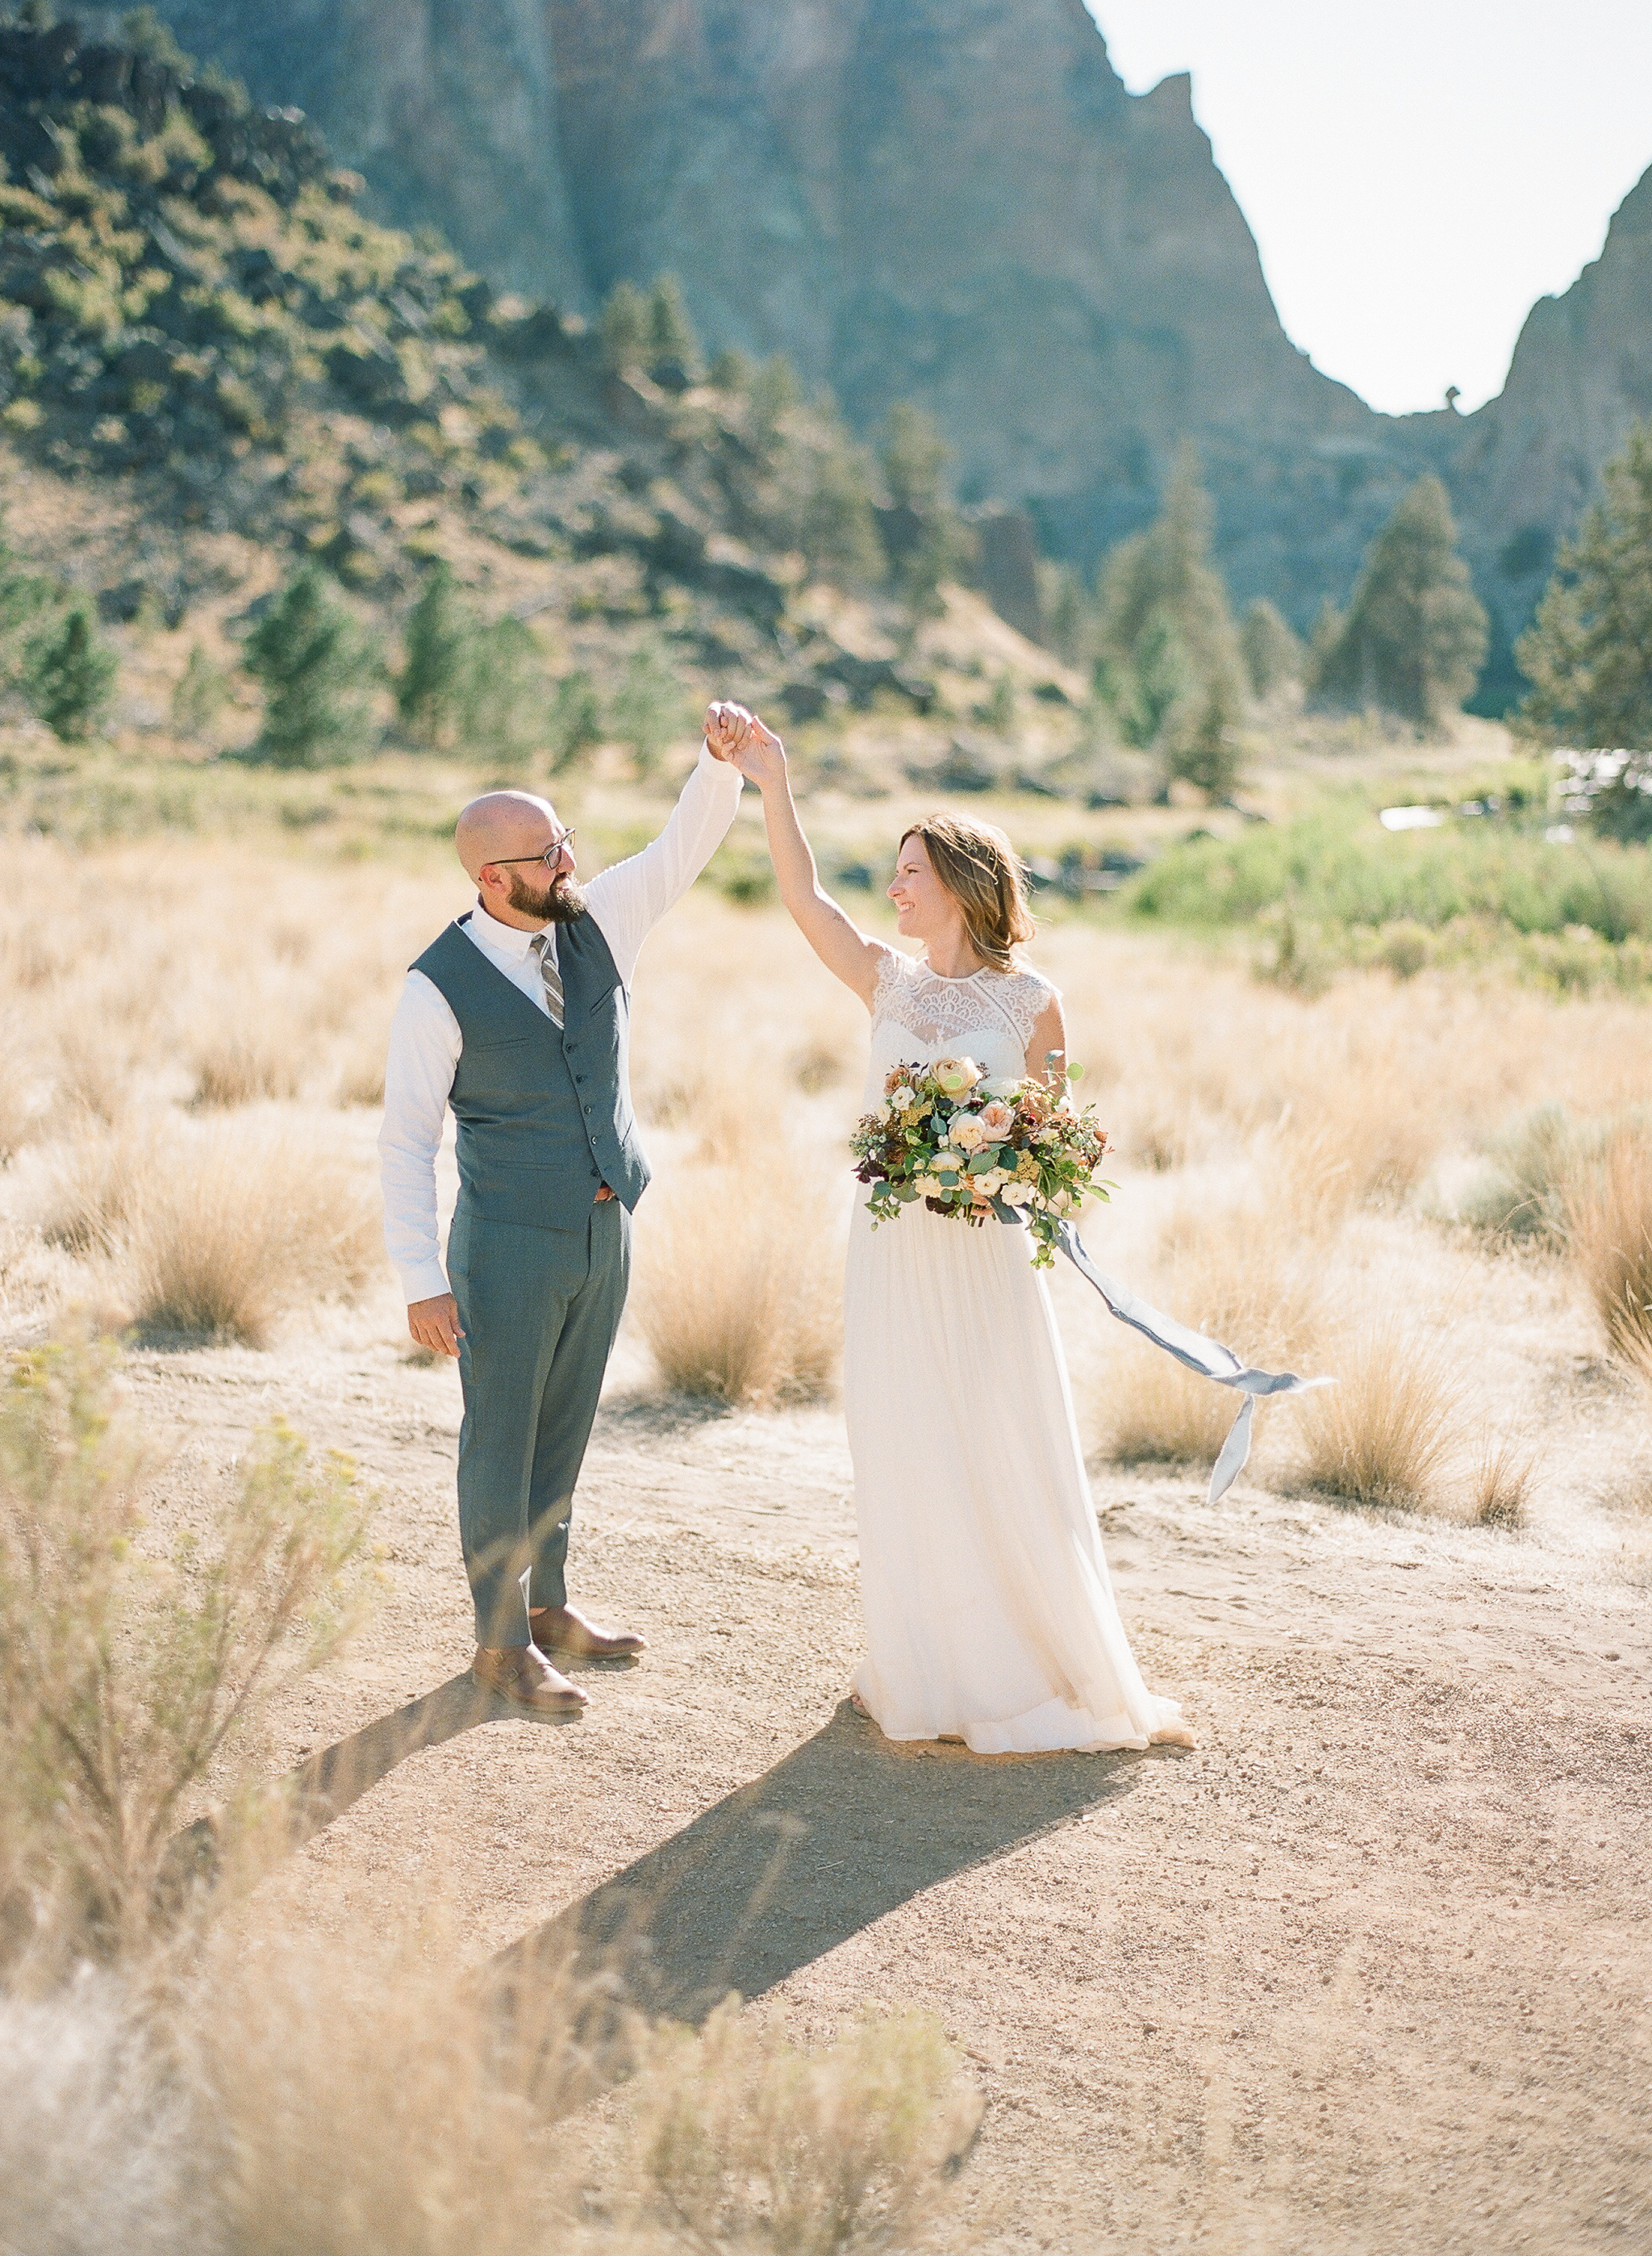 Smith Rock State Park Elopement Photos || The Ganeys